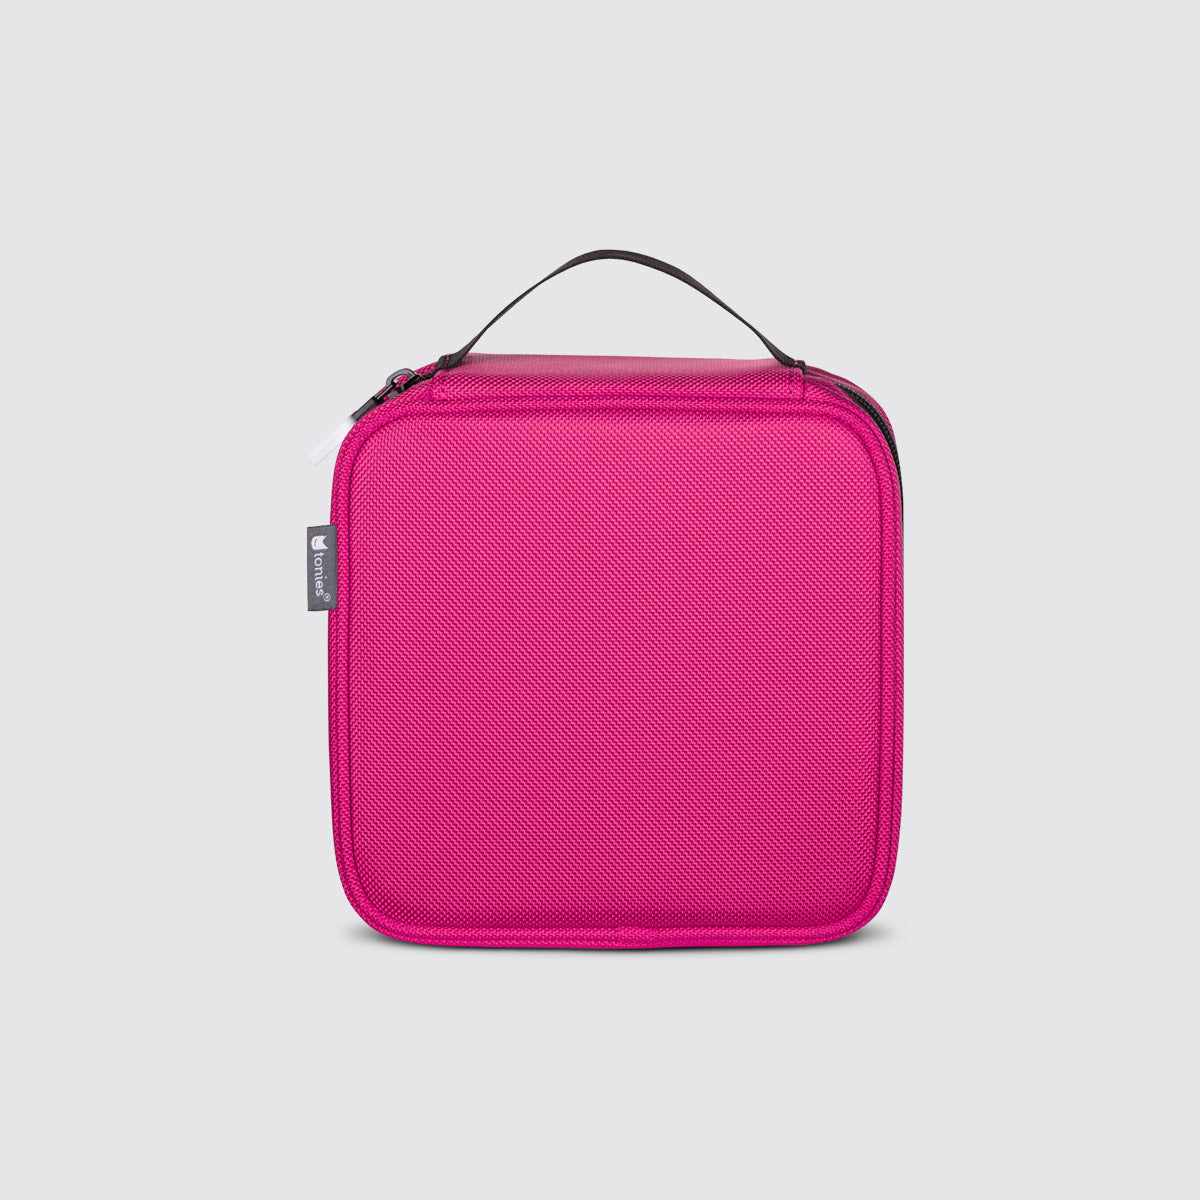 Tonie Carrying Case: Pink